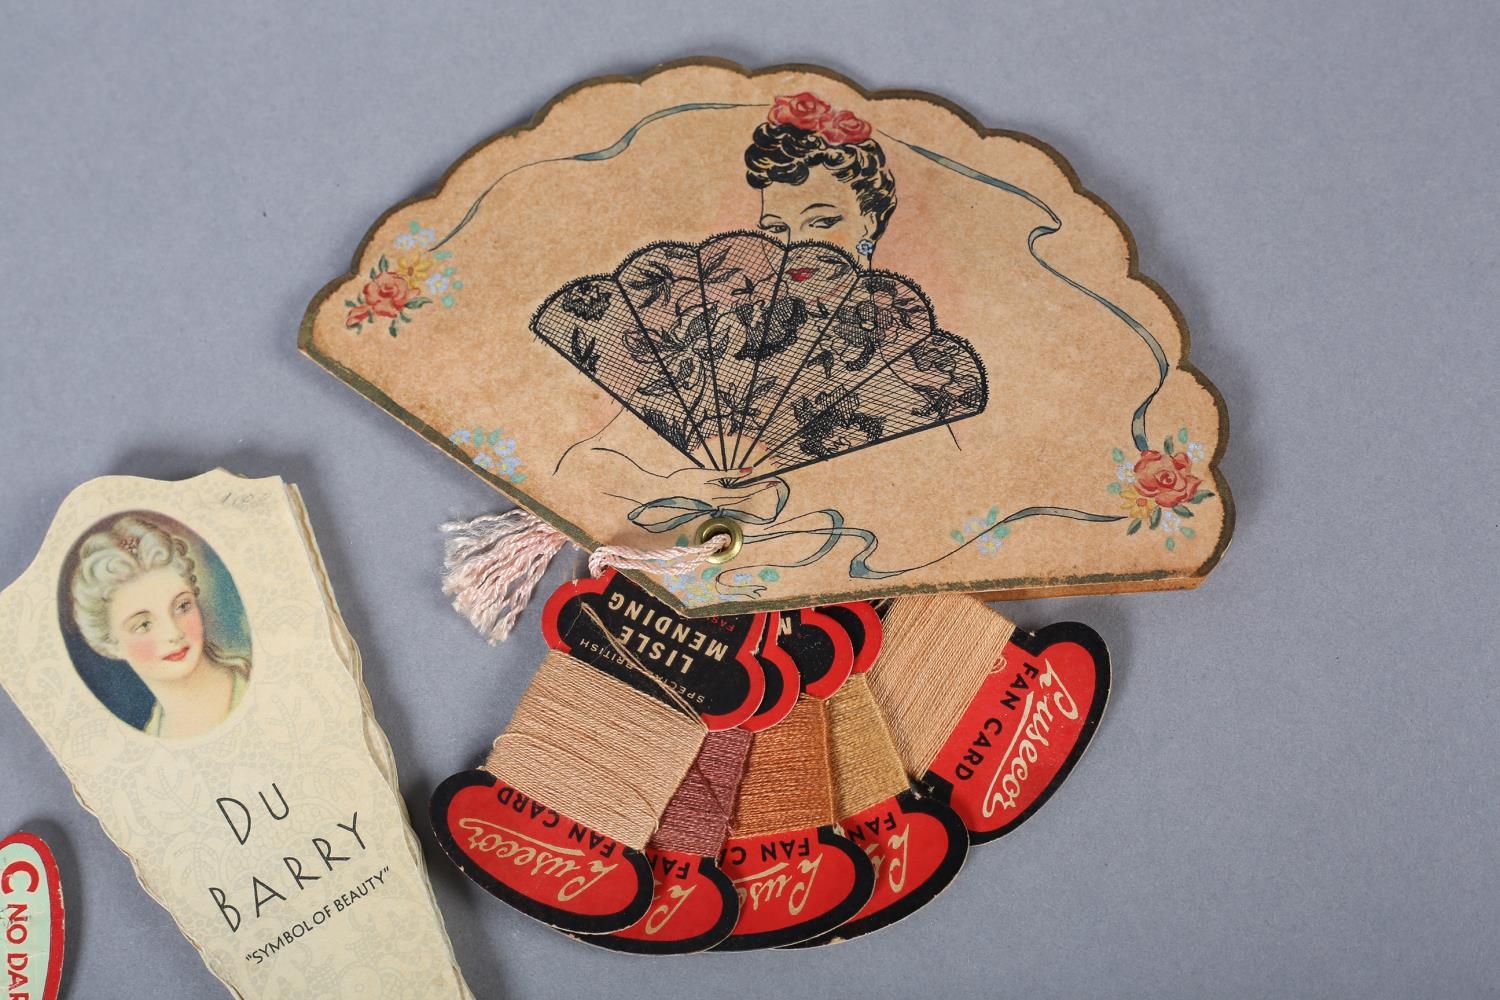 A scarce 1930’s folding cosmetic advertising fan for “Du Barry, Symbol of Beauty” by Richard Hudnut, - Image 2 of 3